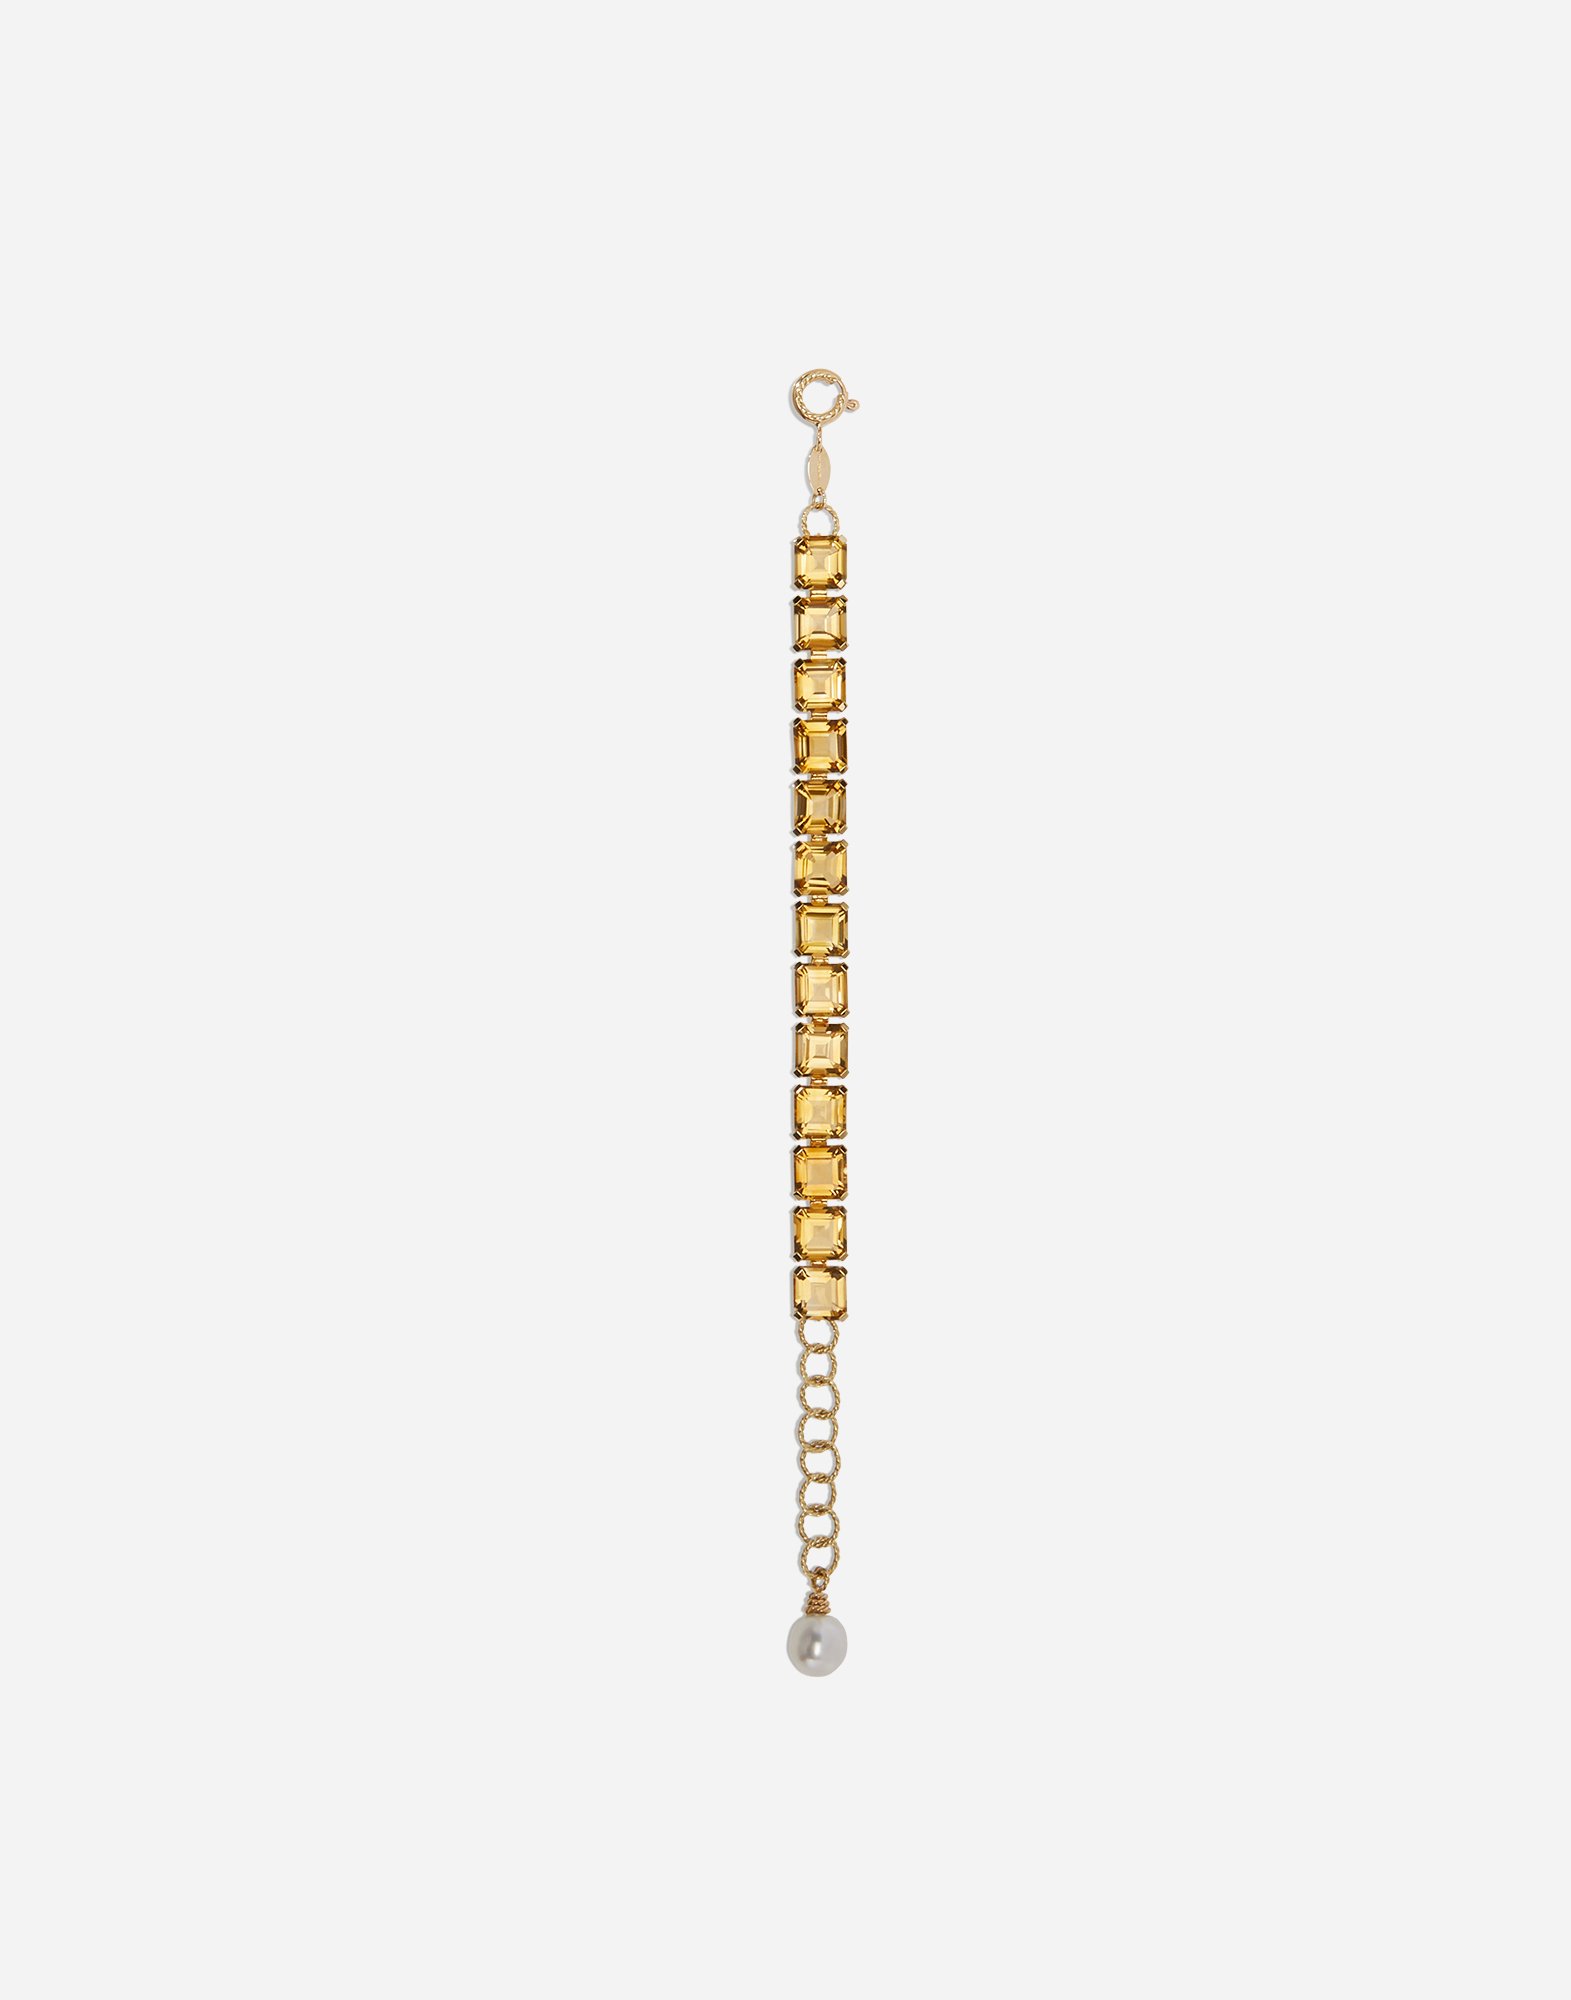 Anna bracelet in yellow gold with citrine quartzes in Gold